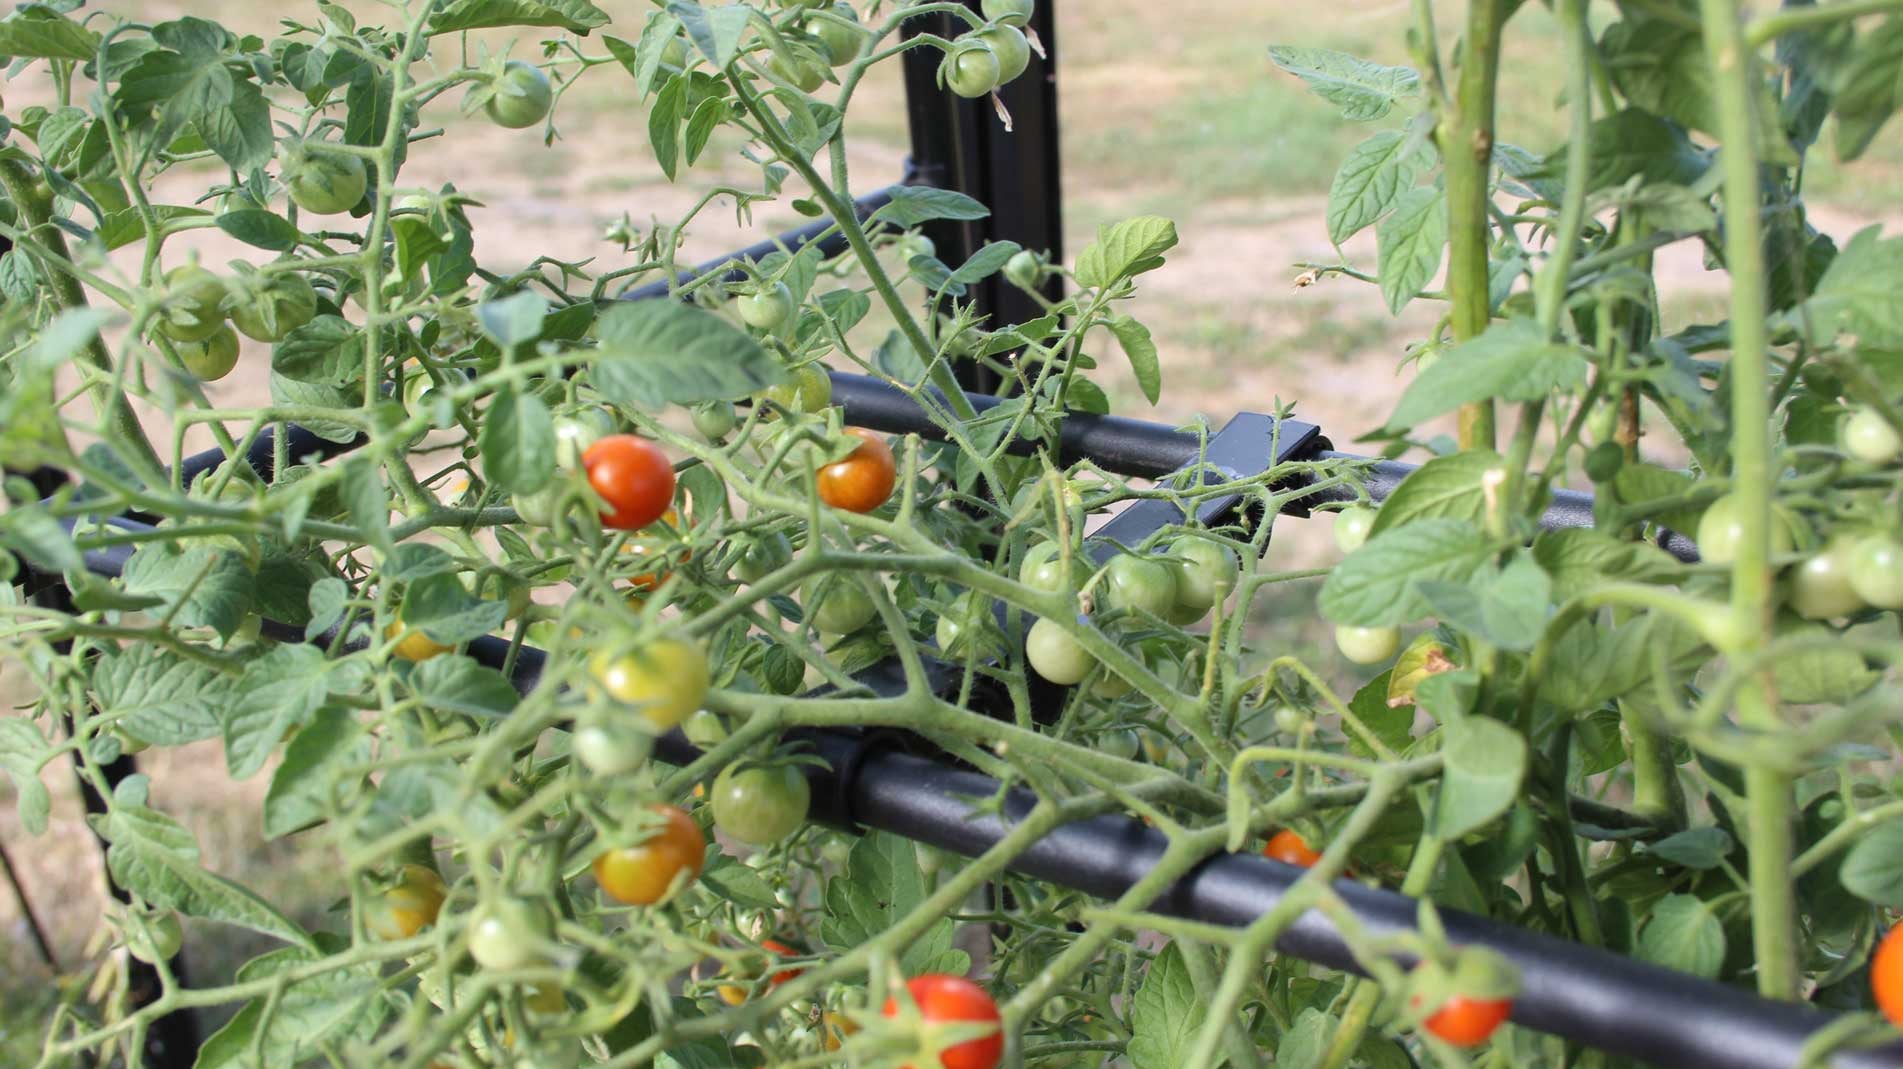 Tomato crop booster - the best way to grow tomatoes and grow bigger better tomatoes